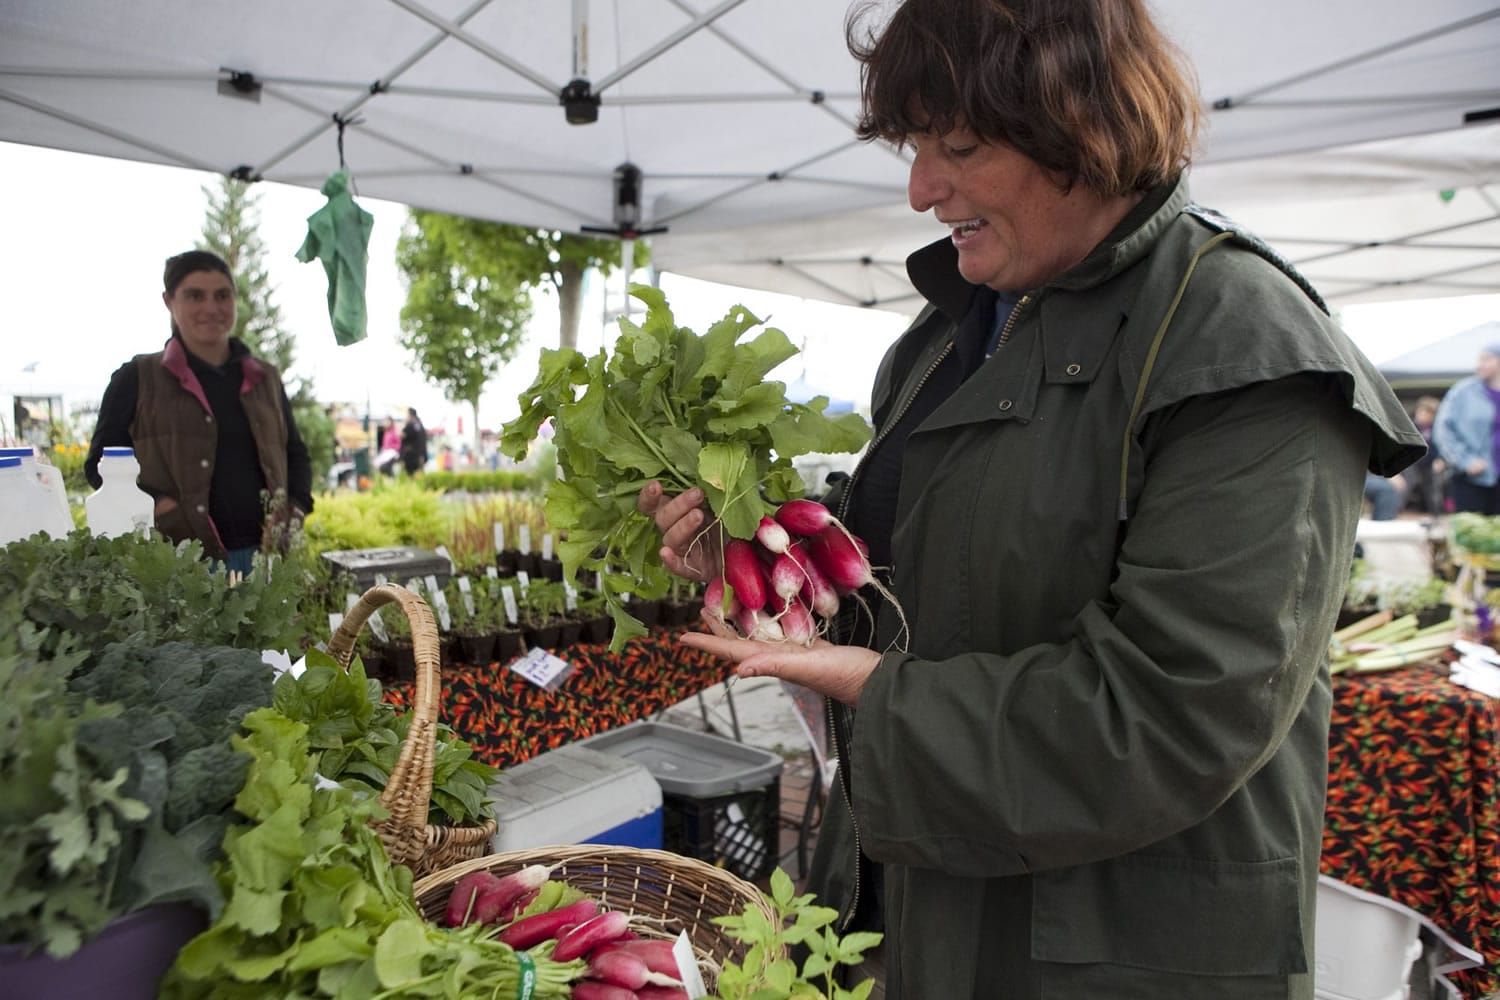 Anne Mari De Boever looked through the fresh vegetables offered for sale by Yacolt Mountain Farm and Nurseries, run by Caroline Swansey (in back) at the Harvest Days Celebration in Battle Ground Village last July.